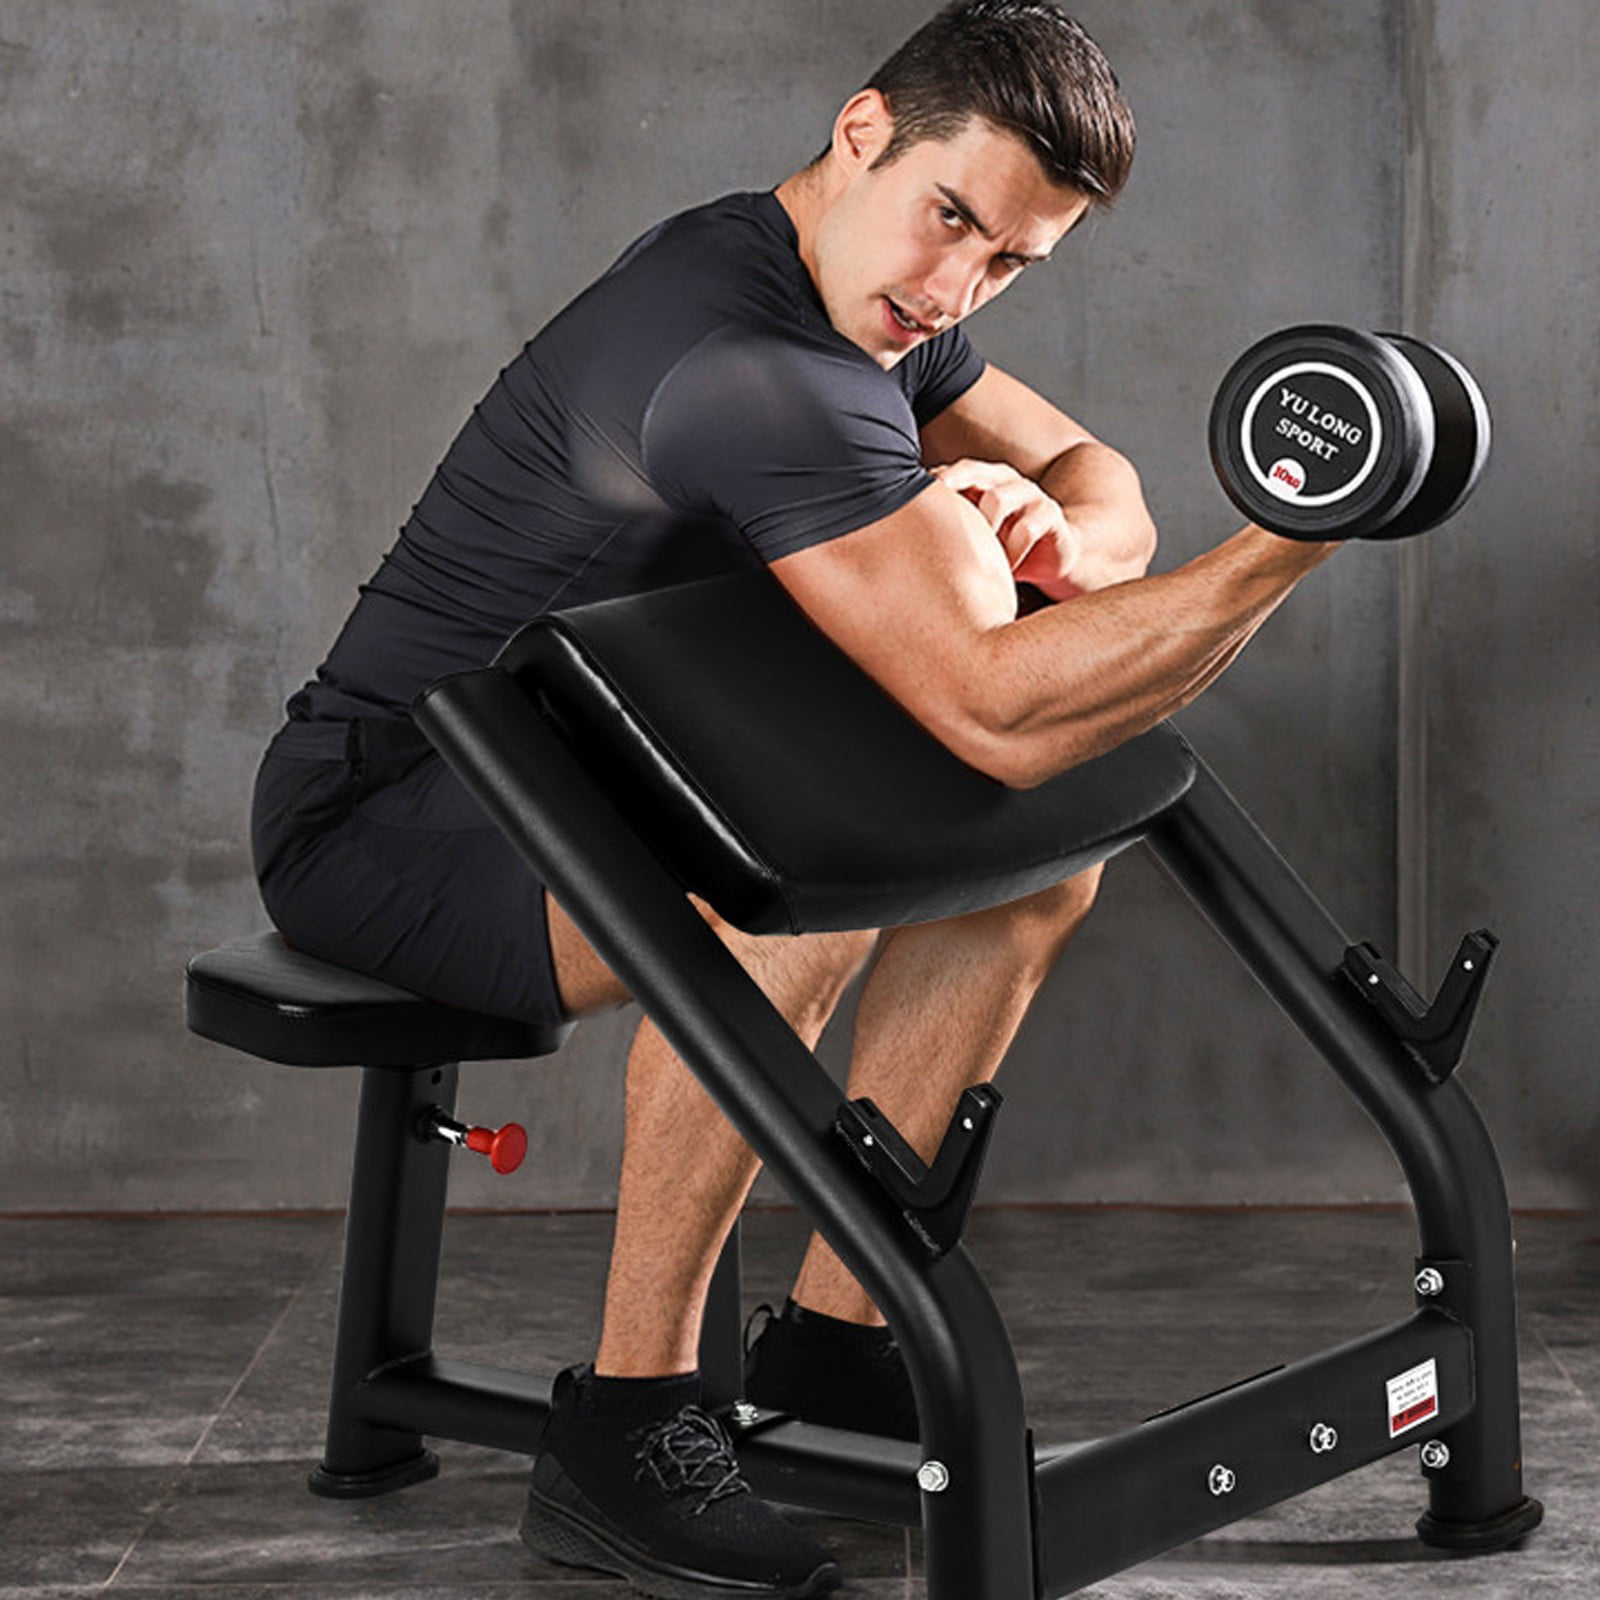 Biceps Station Weight Bench Roman Chair Pastor Stool Arm Curl Strength Training 